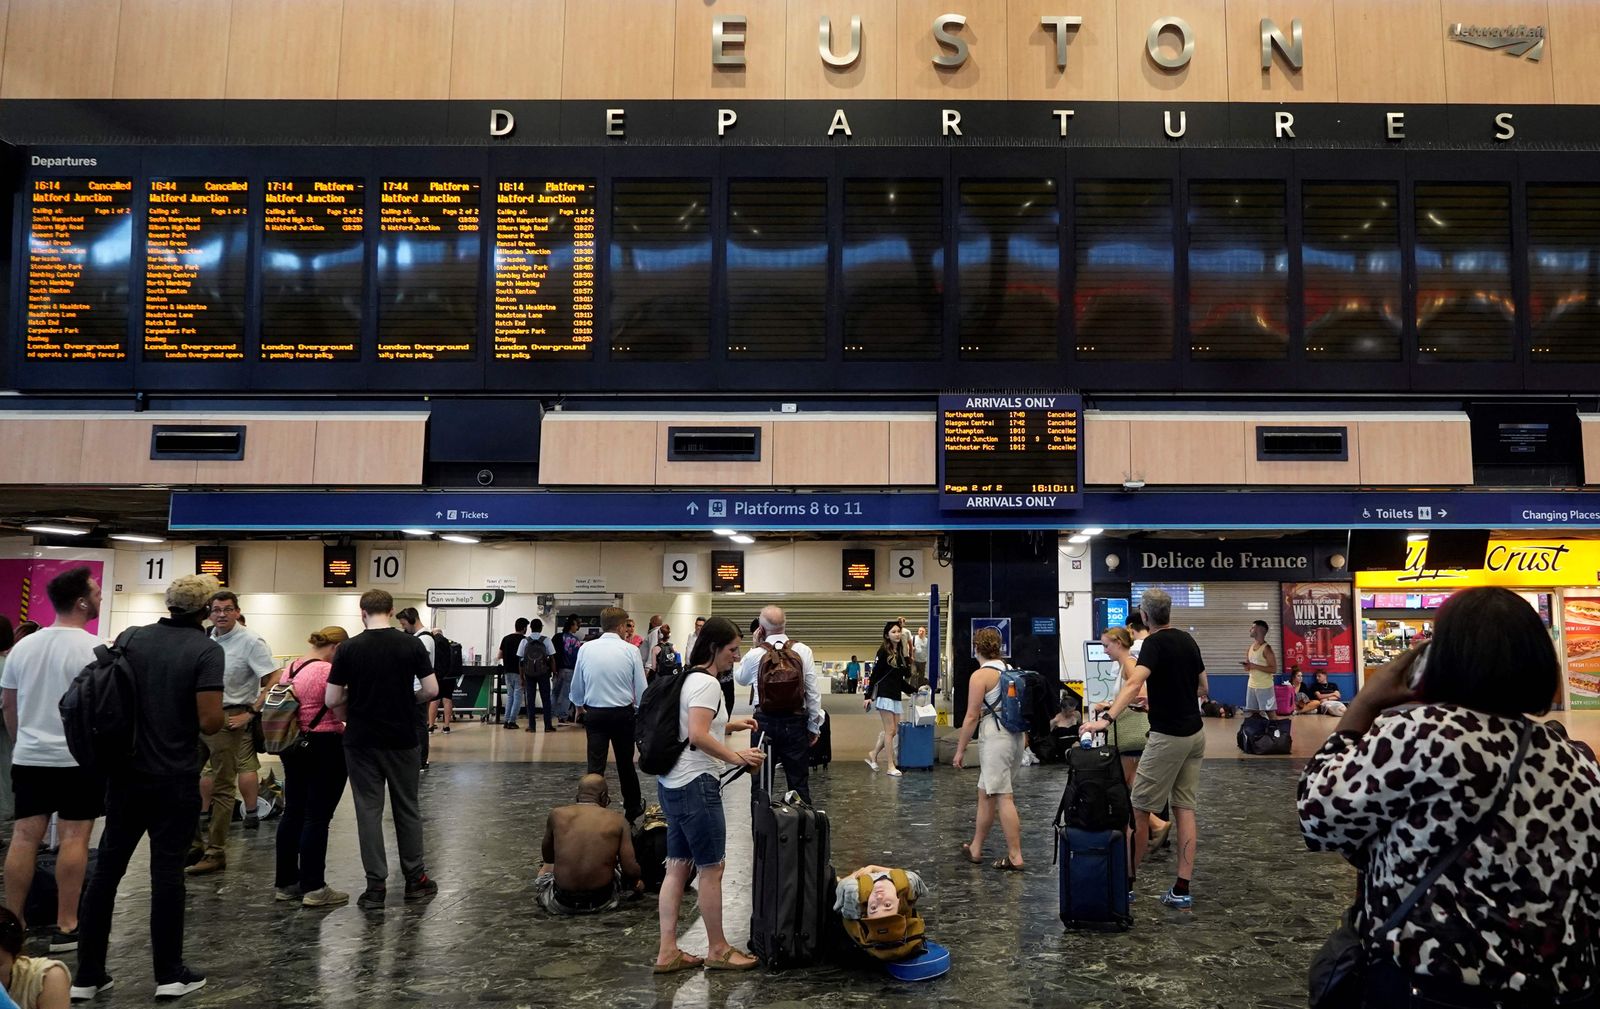 Travellers look at the blank departures board at Euston train station in central London, on July 19, 2022, as services were cancelled due to a trackside fire, and as the country experiences an extreme heat wave. - All services to and from London Euston were on Tuesday suspended, as emergency services dealt with a fire on the trackside. After the UK's warmest night on record, the Met Office said 40.2C had been provisionally recorded by lunchtime at Heathrow Airport, in west London, taking the country into uncharted territory. (Photo by Niklas HALLE'N / AFP) - AFP